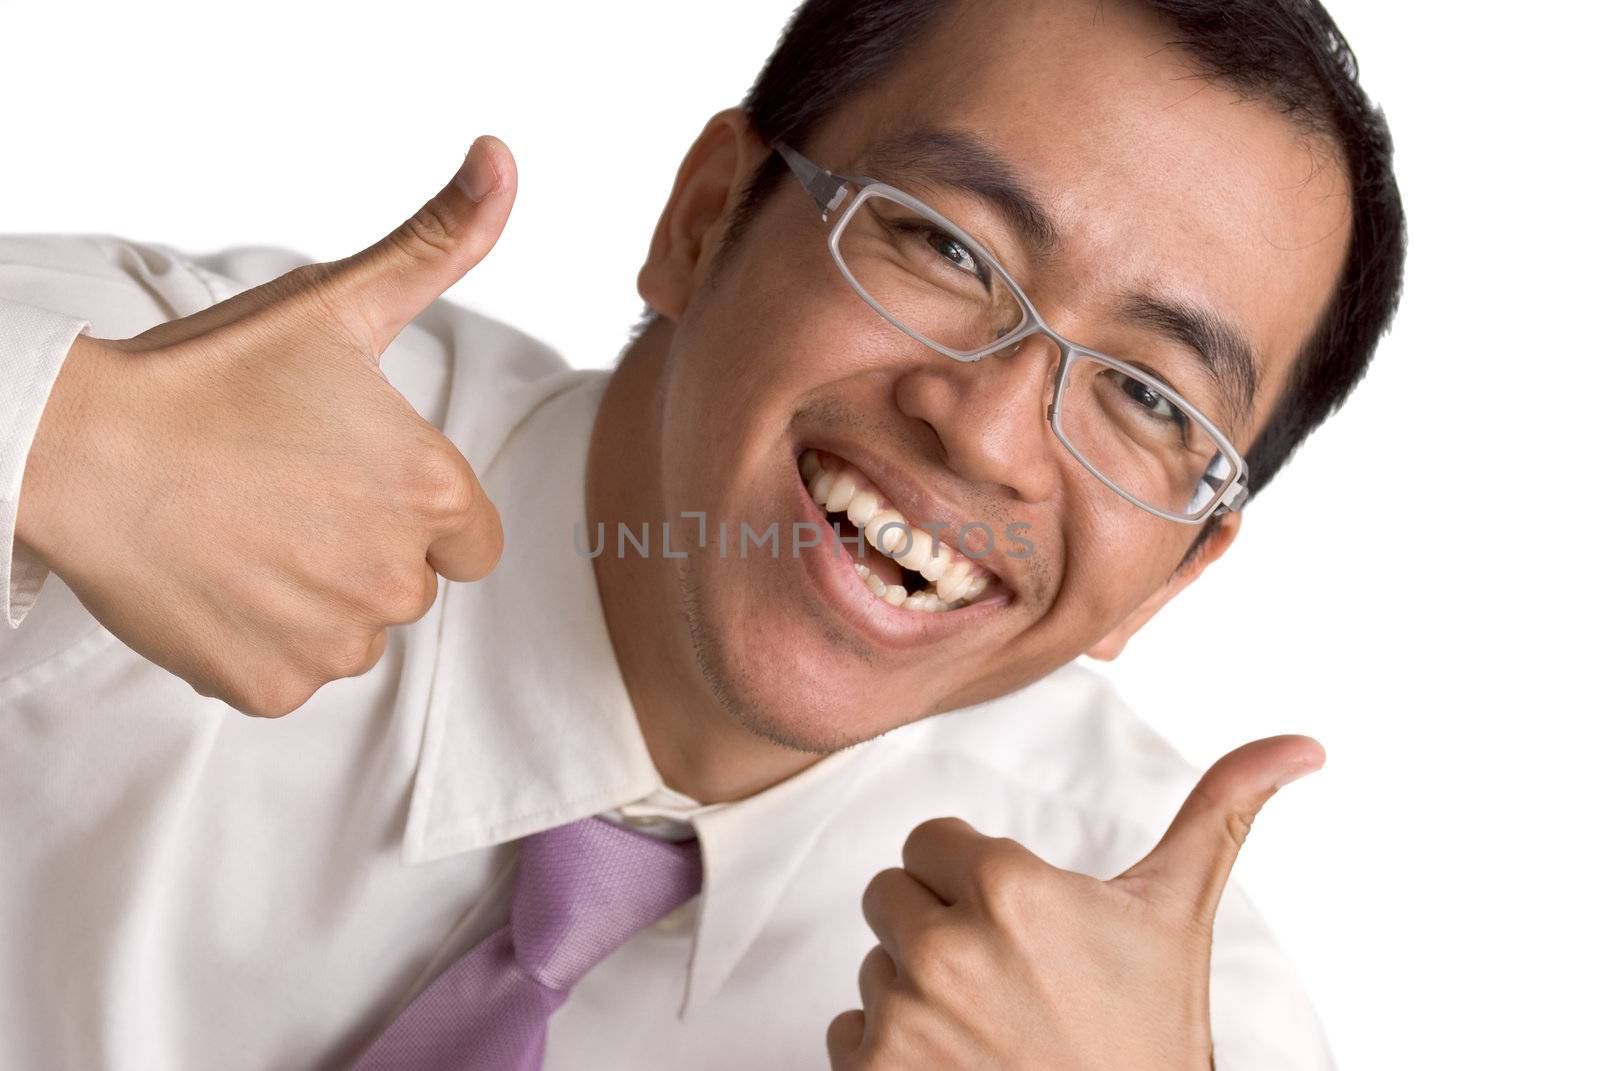 Happy business man extended thumb on white background.